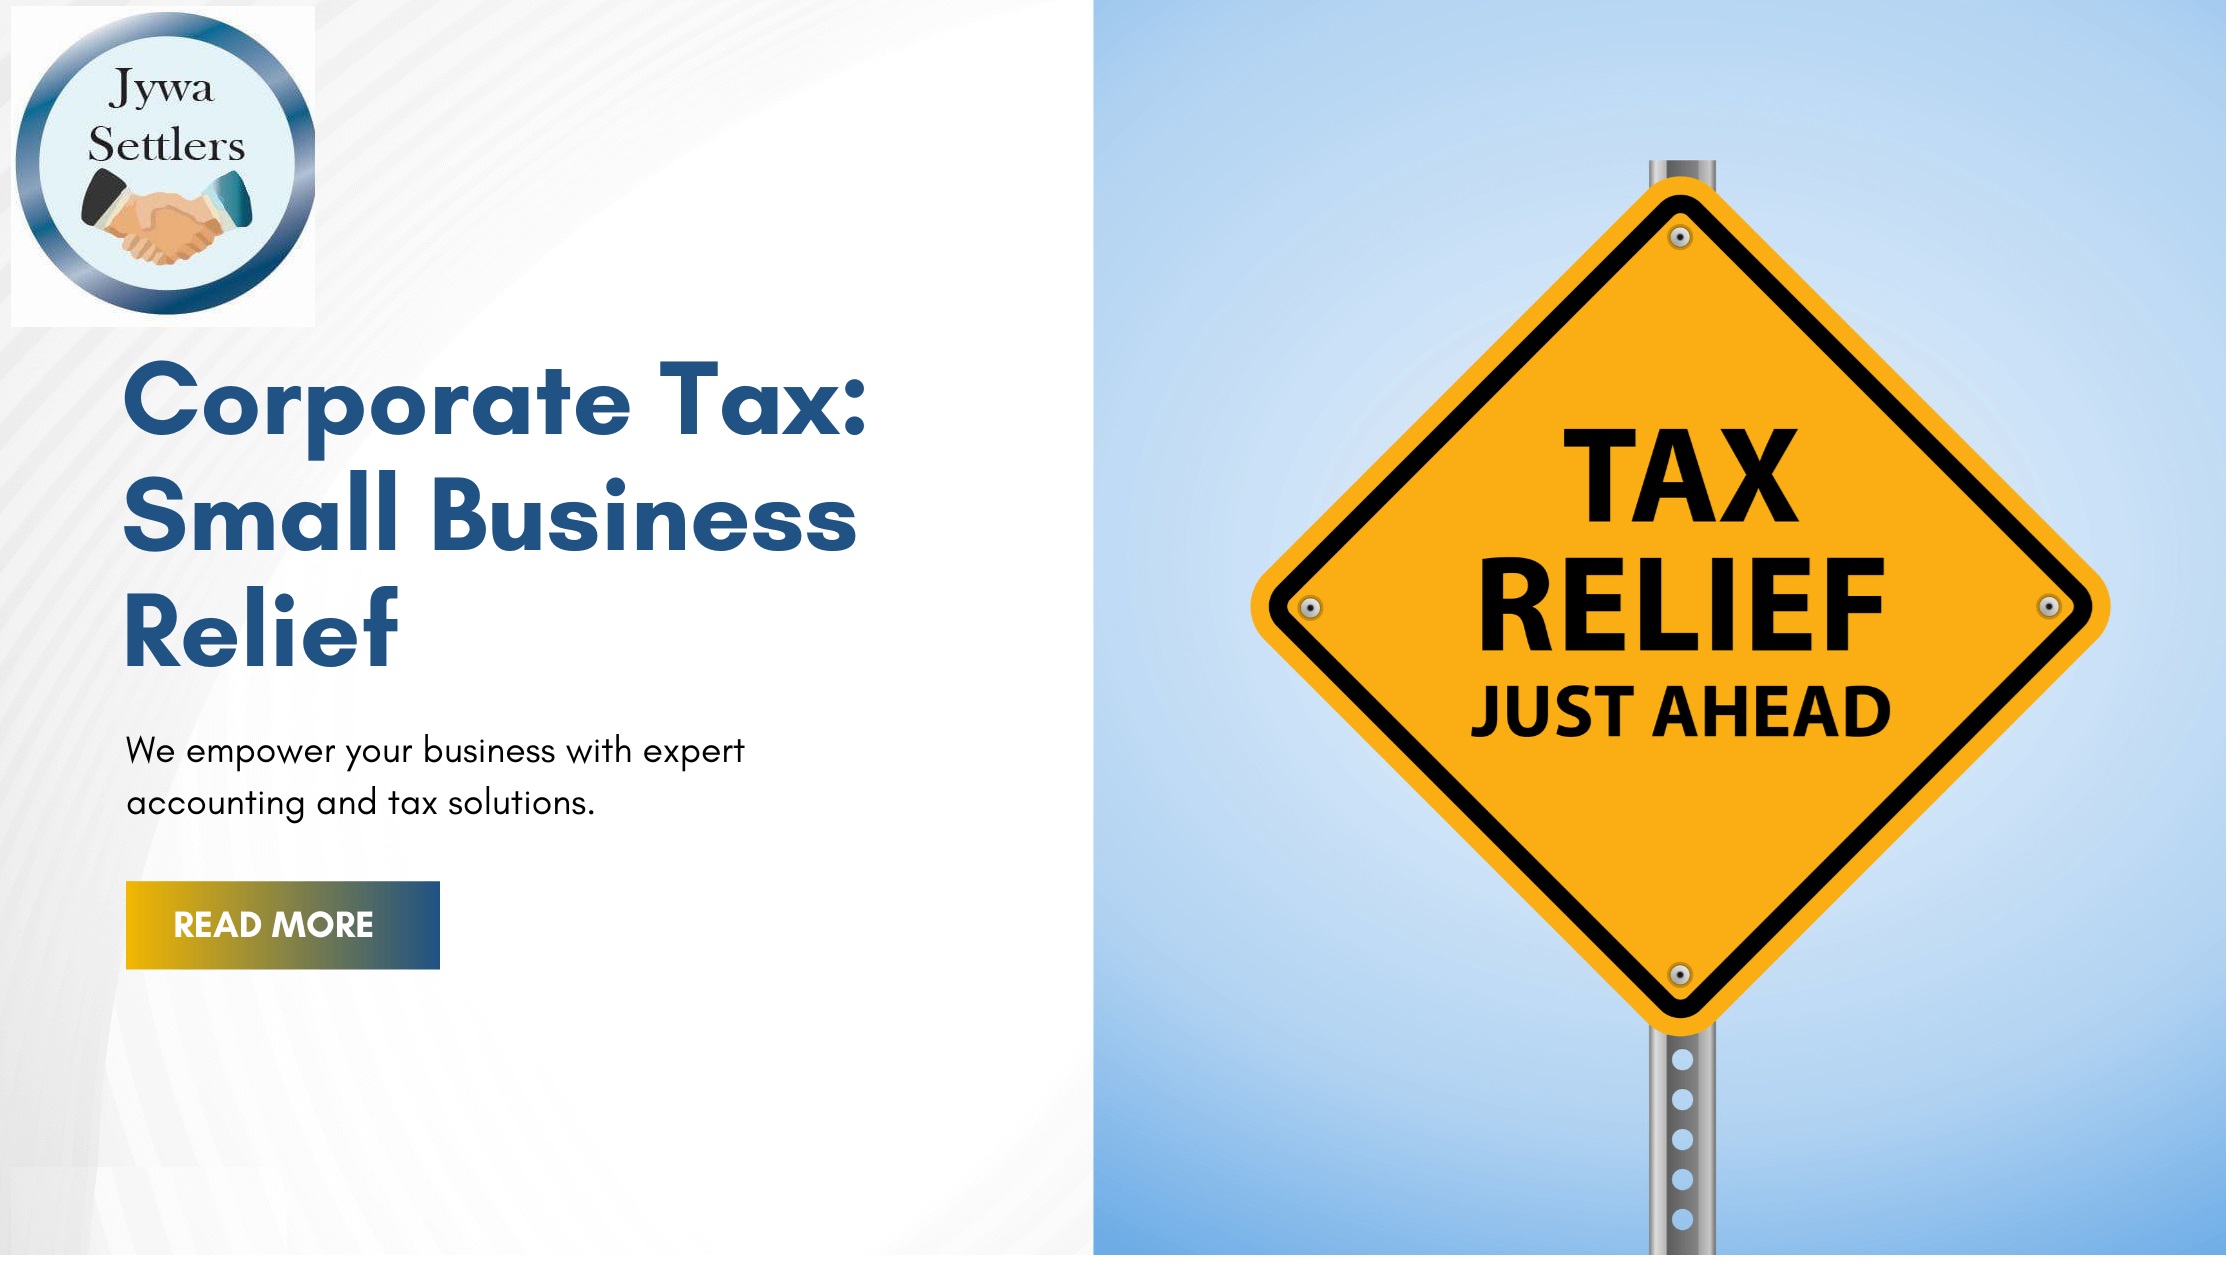 Small Business Relief and Corporate Taxation